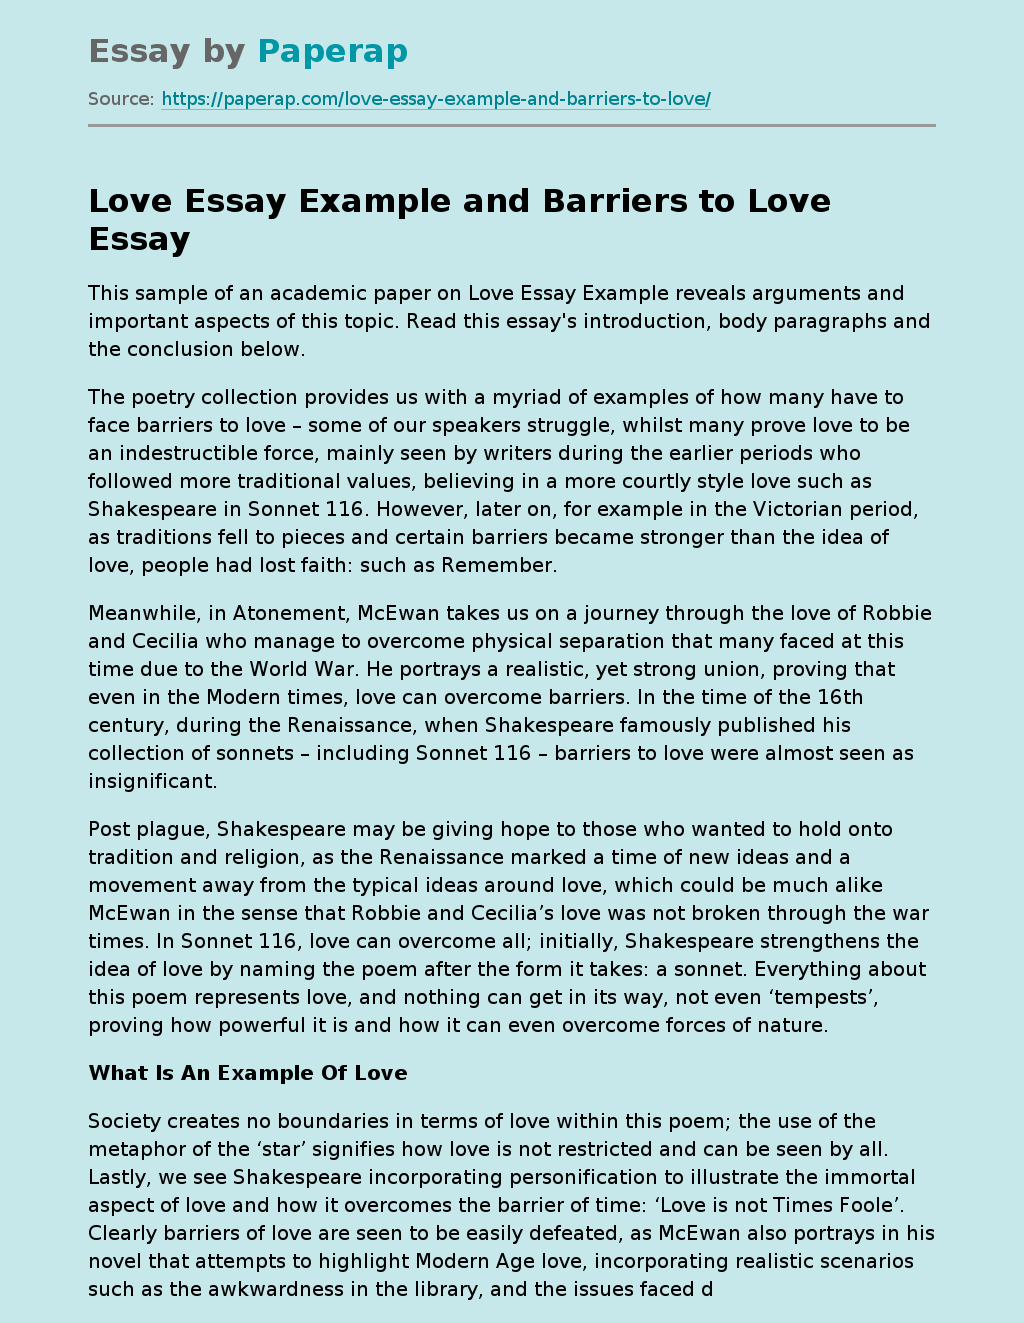 Love Example and Barriers to Love